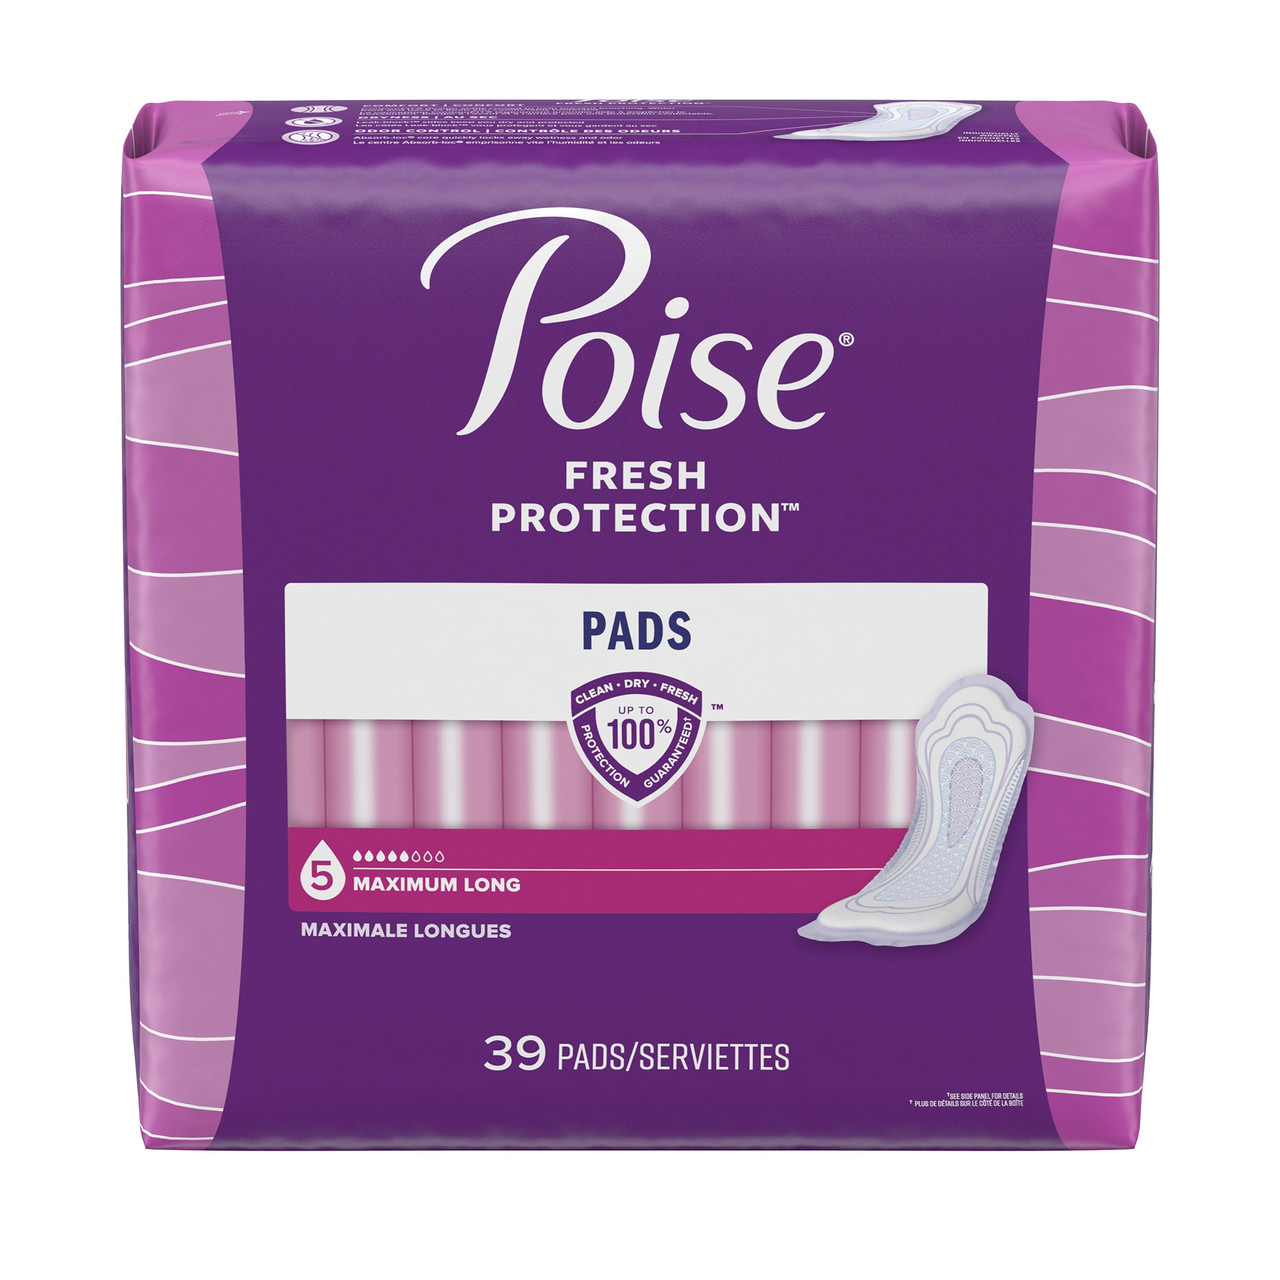 Poise Bladder Control Pads for Women, Maximum Absorbency - One